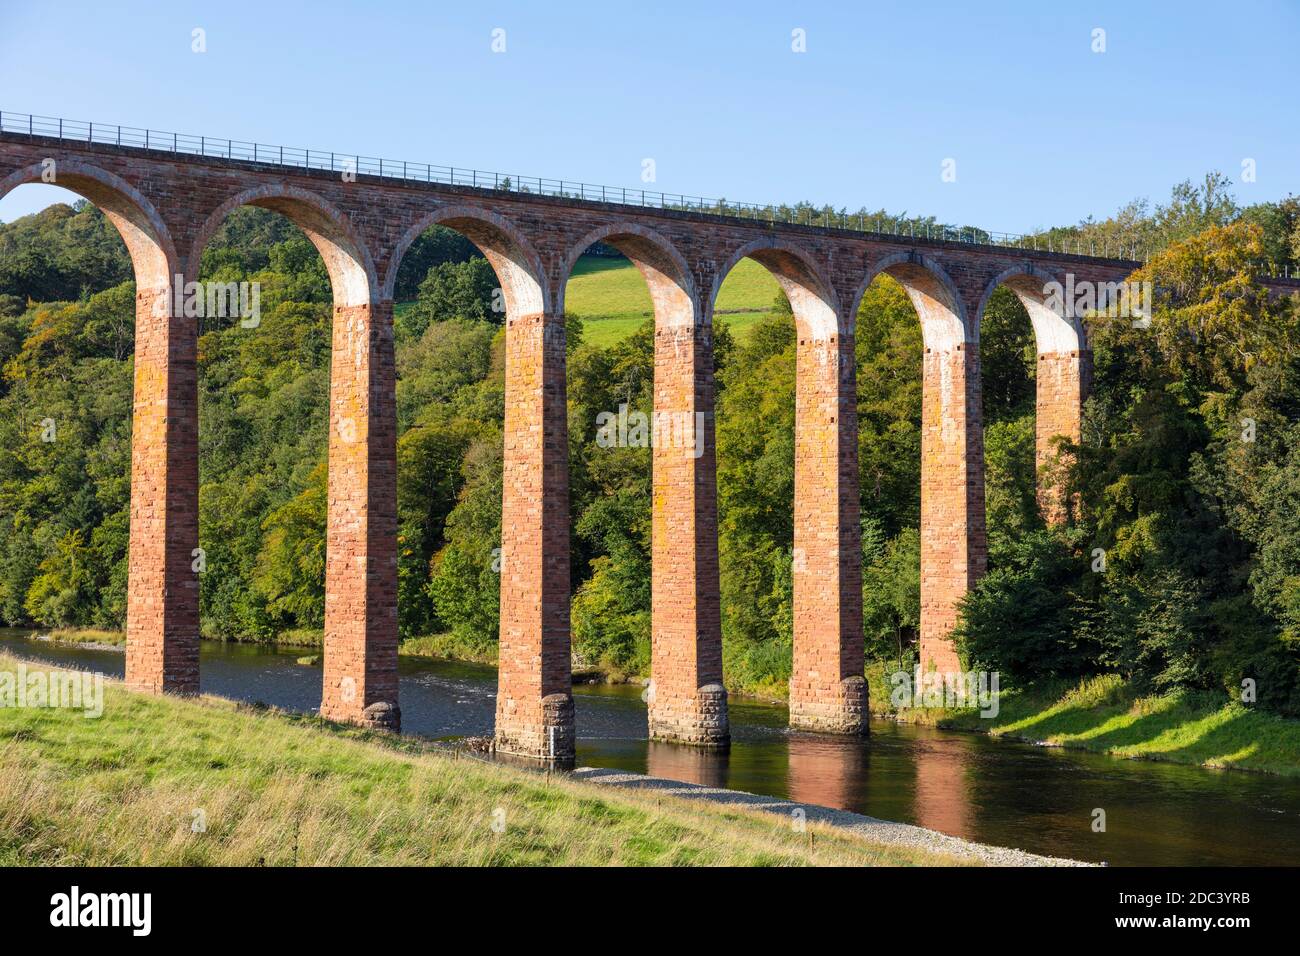 The Leaderfoot Viaduct over River Tweed Ravenswood near Melrose Scottish Borders Scotland UK GB Europe known as the Drygrange Viaduct Stock Photo